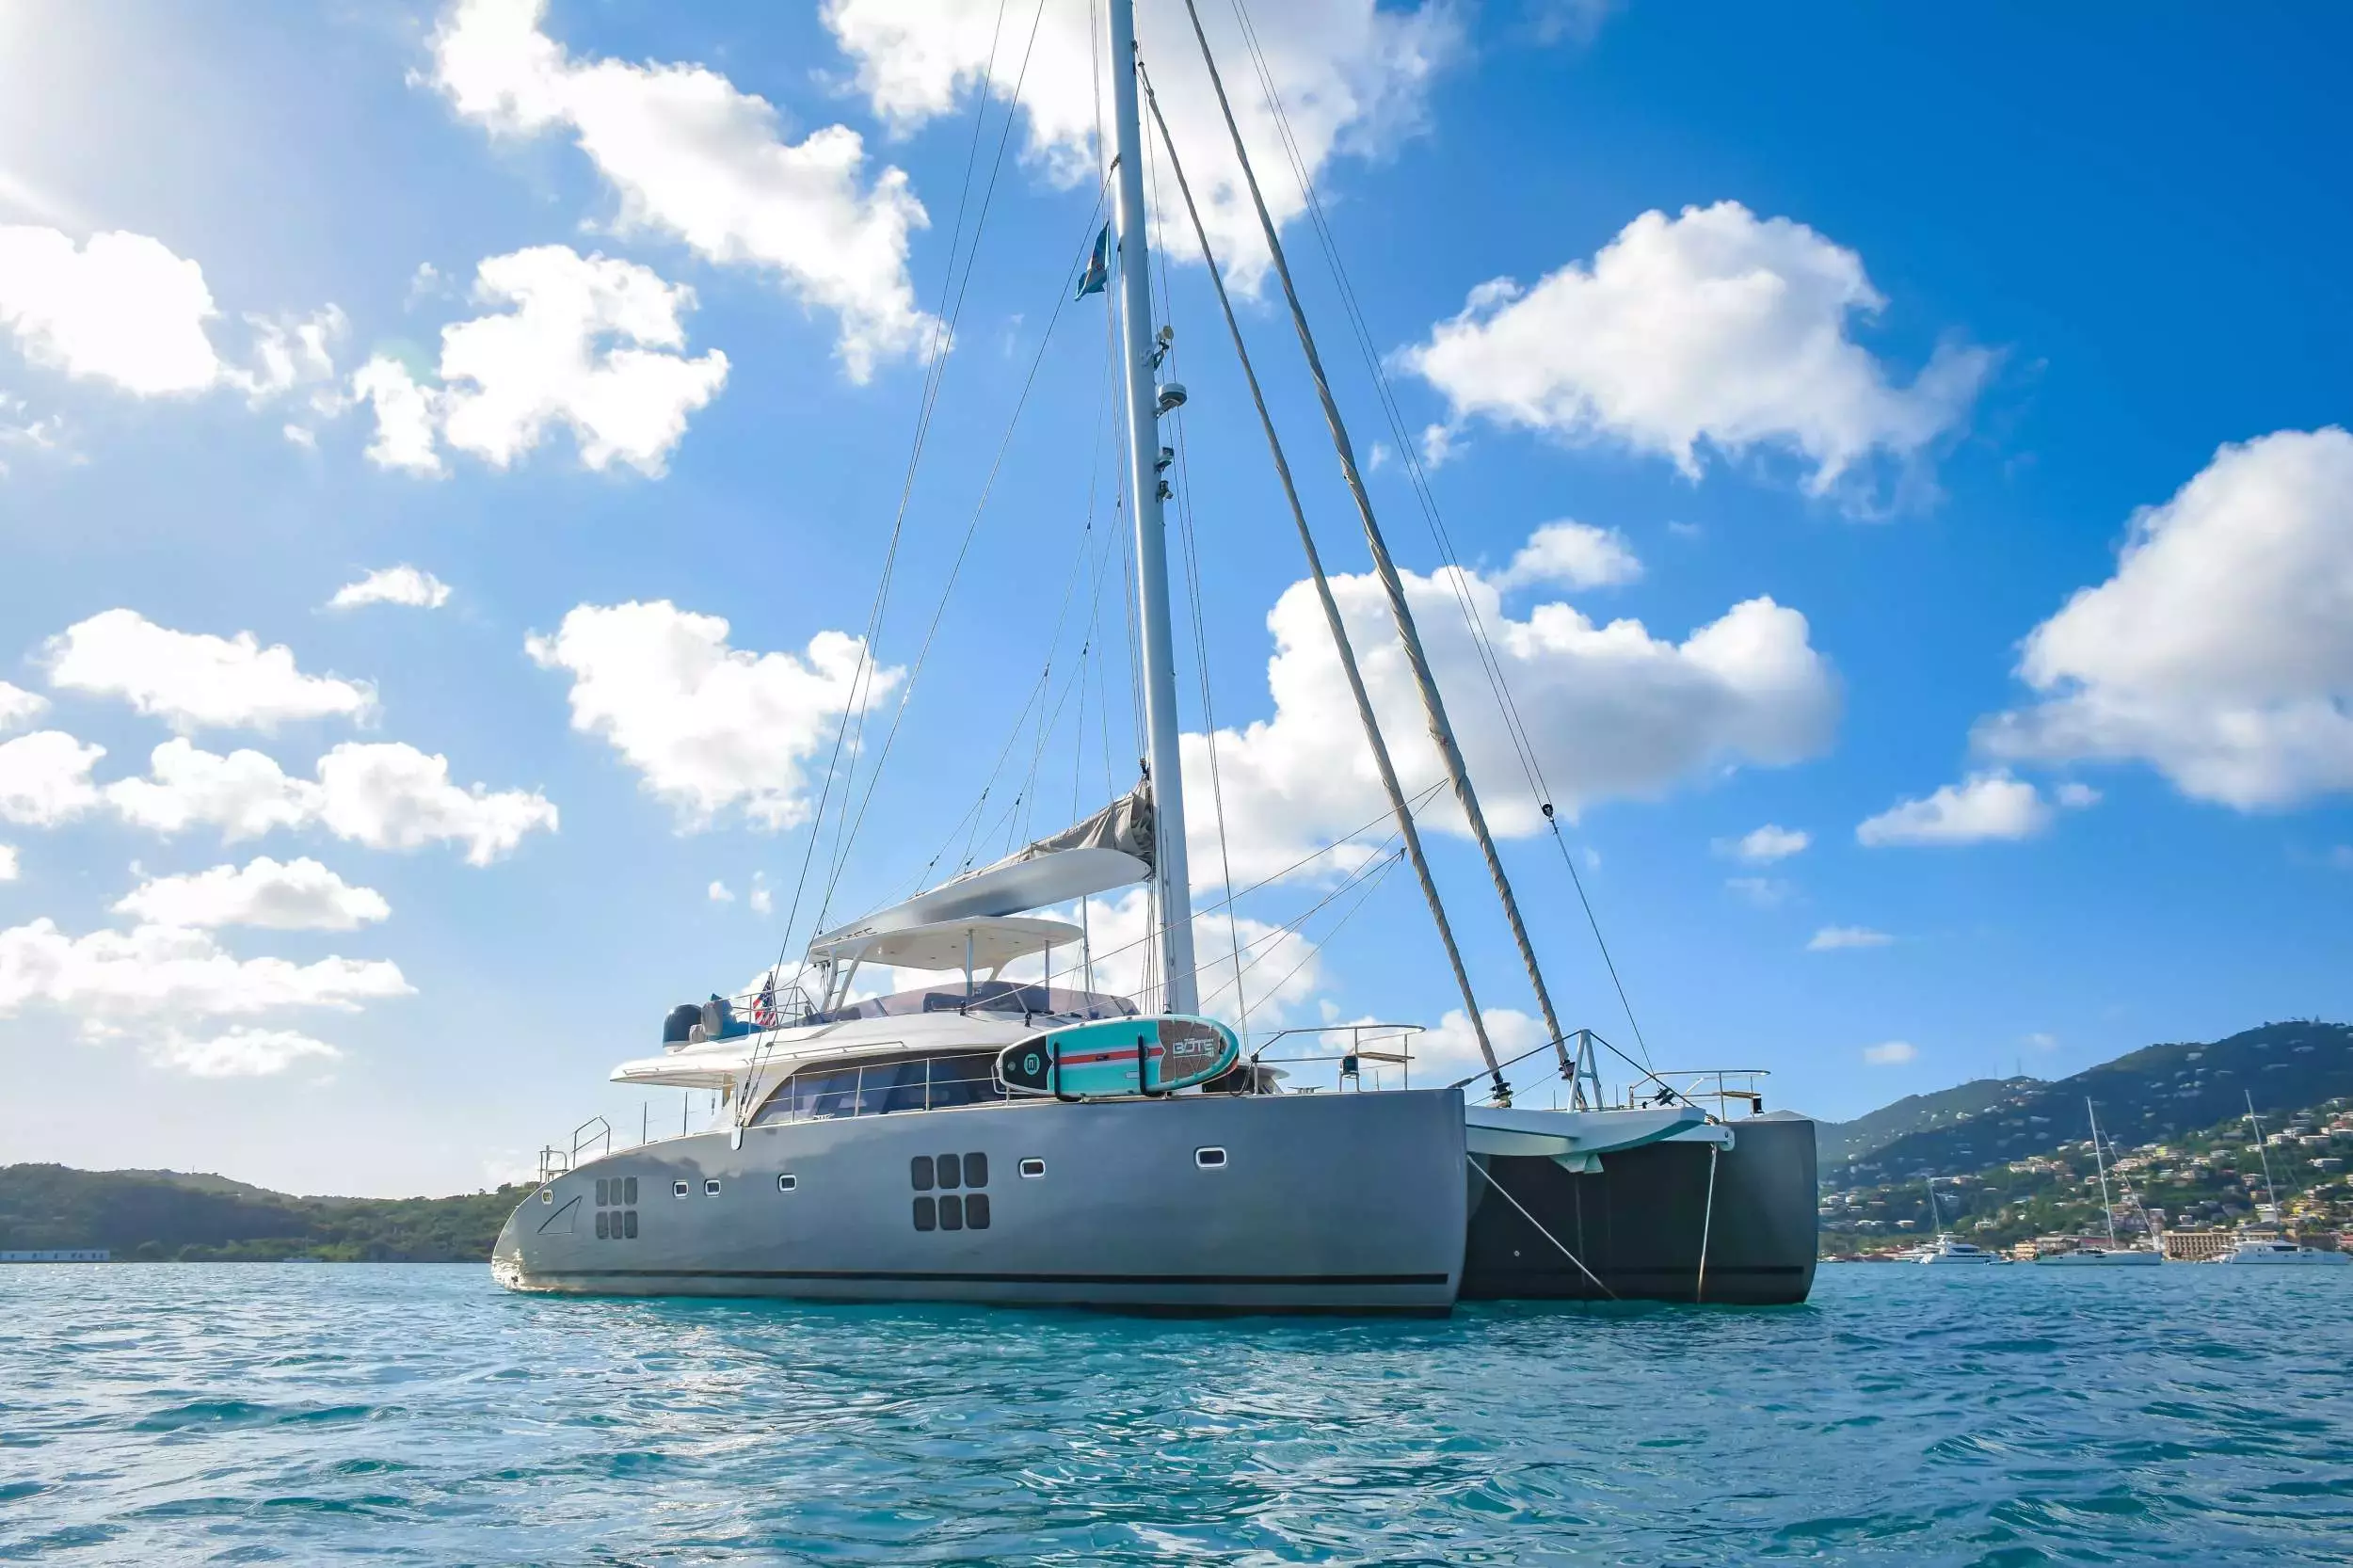 Excess by Sunreef Yachts - Top rates for a Charter of a private Luxury Catamaran in US Virgin Islands